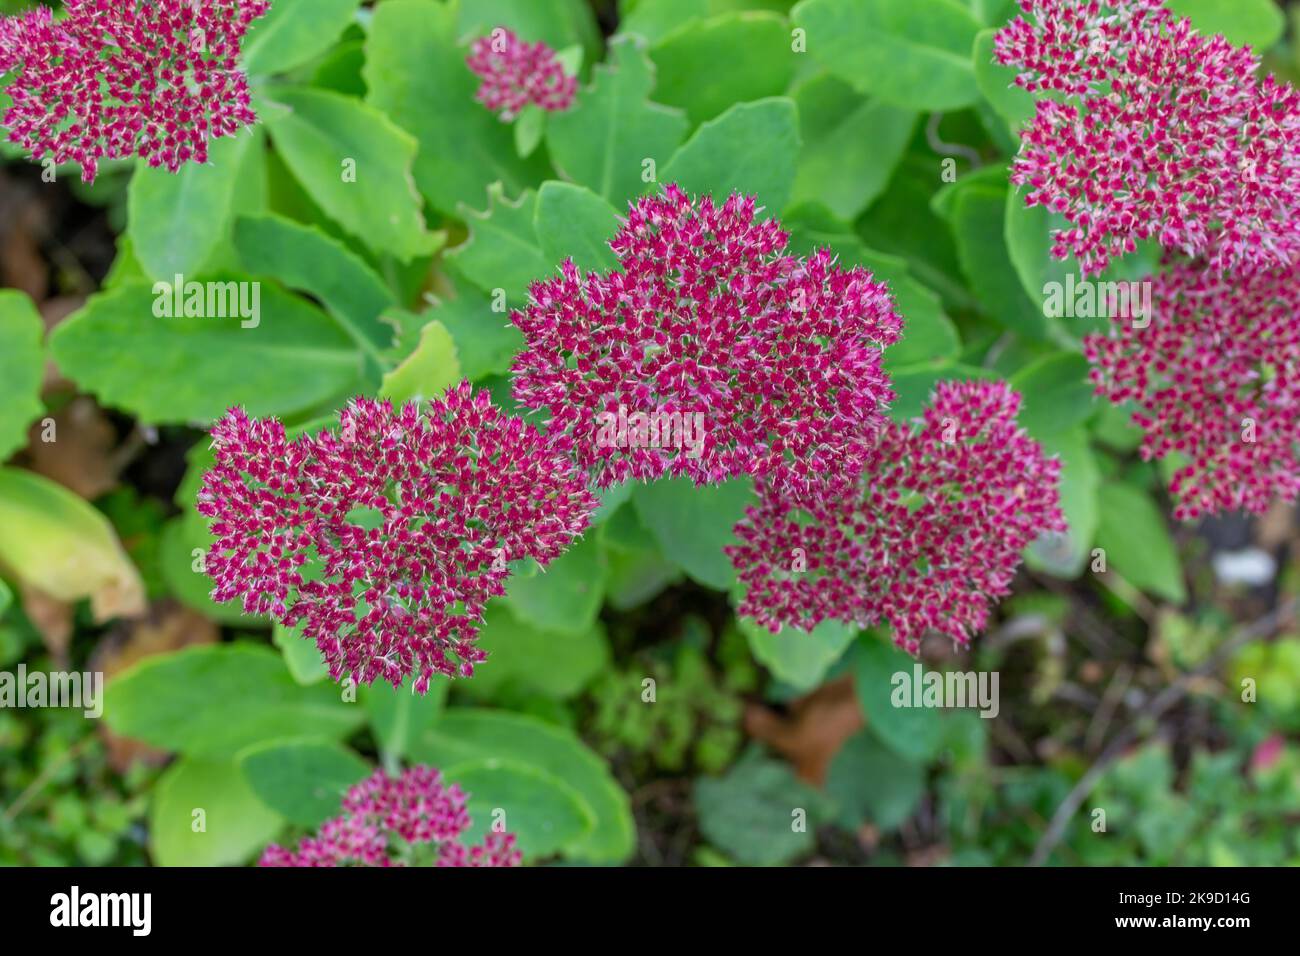 Macro view of a pink blooming sedum spectabile (hylotelephium spectabile) flowering bush in a sunny autumn garden Stock Photo